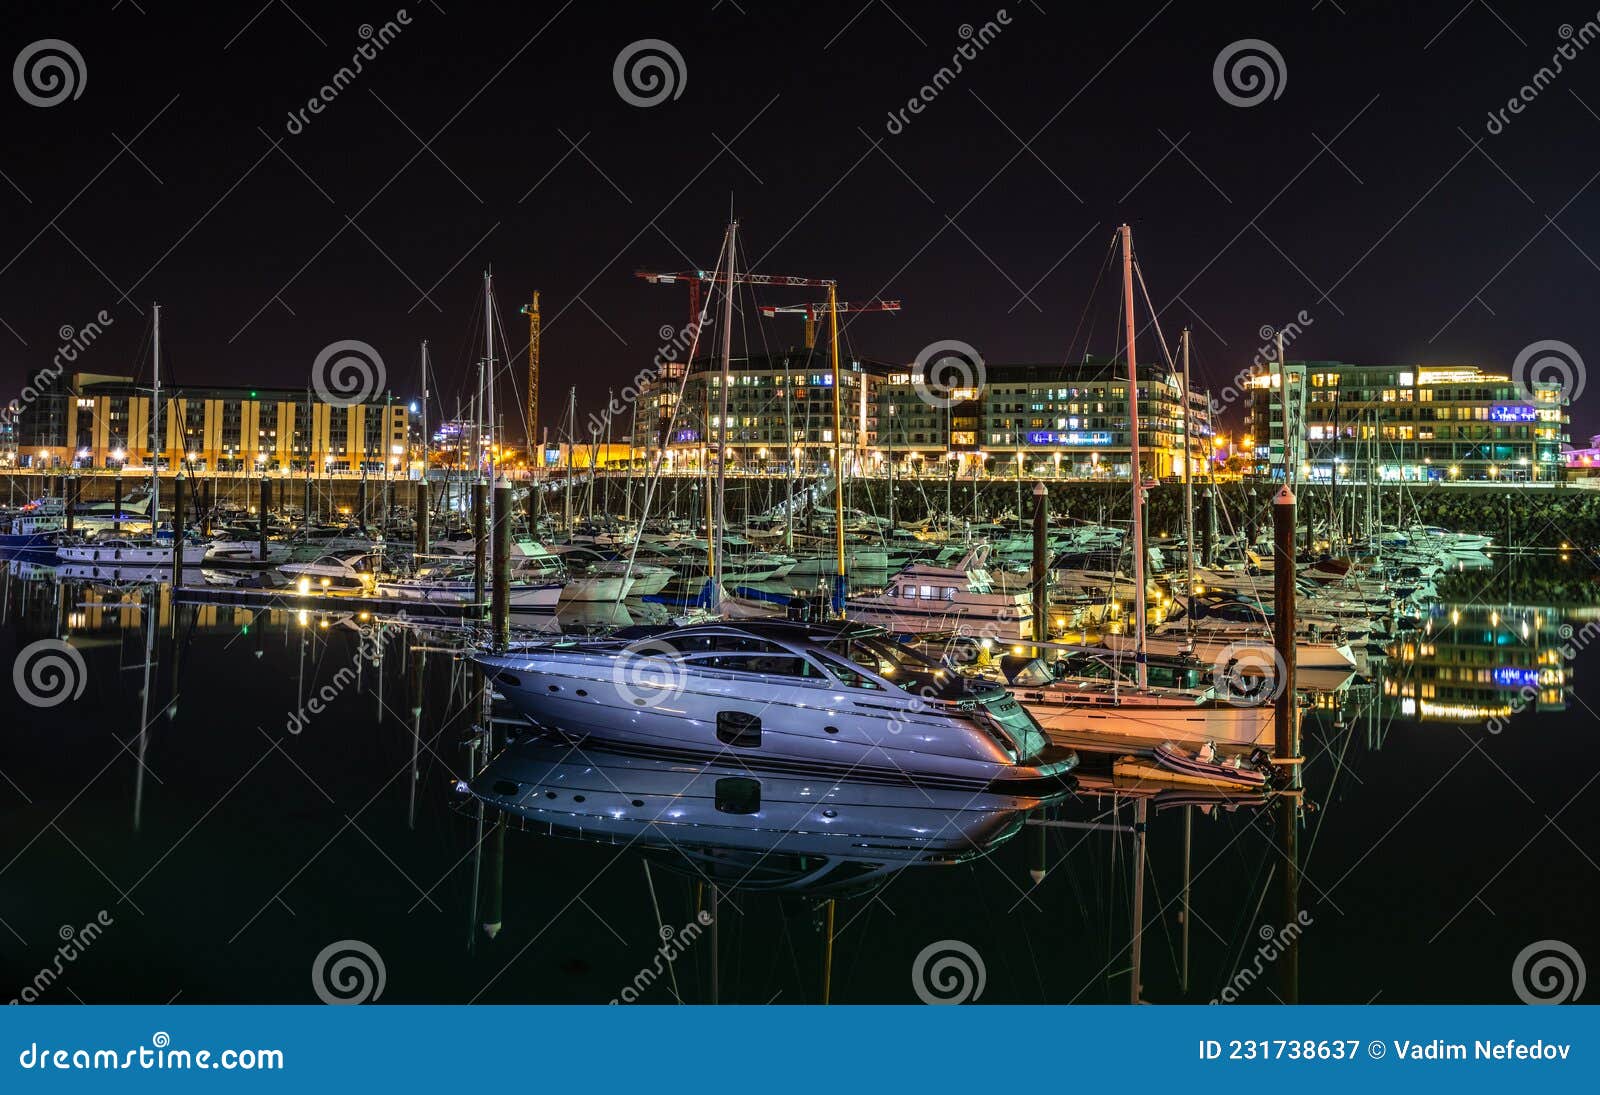 Marina with Yachts in the Evening Lights, Saint Helier, Bailiwick of ...